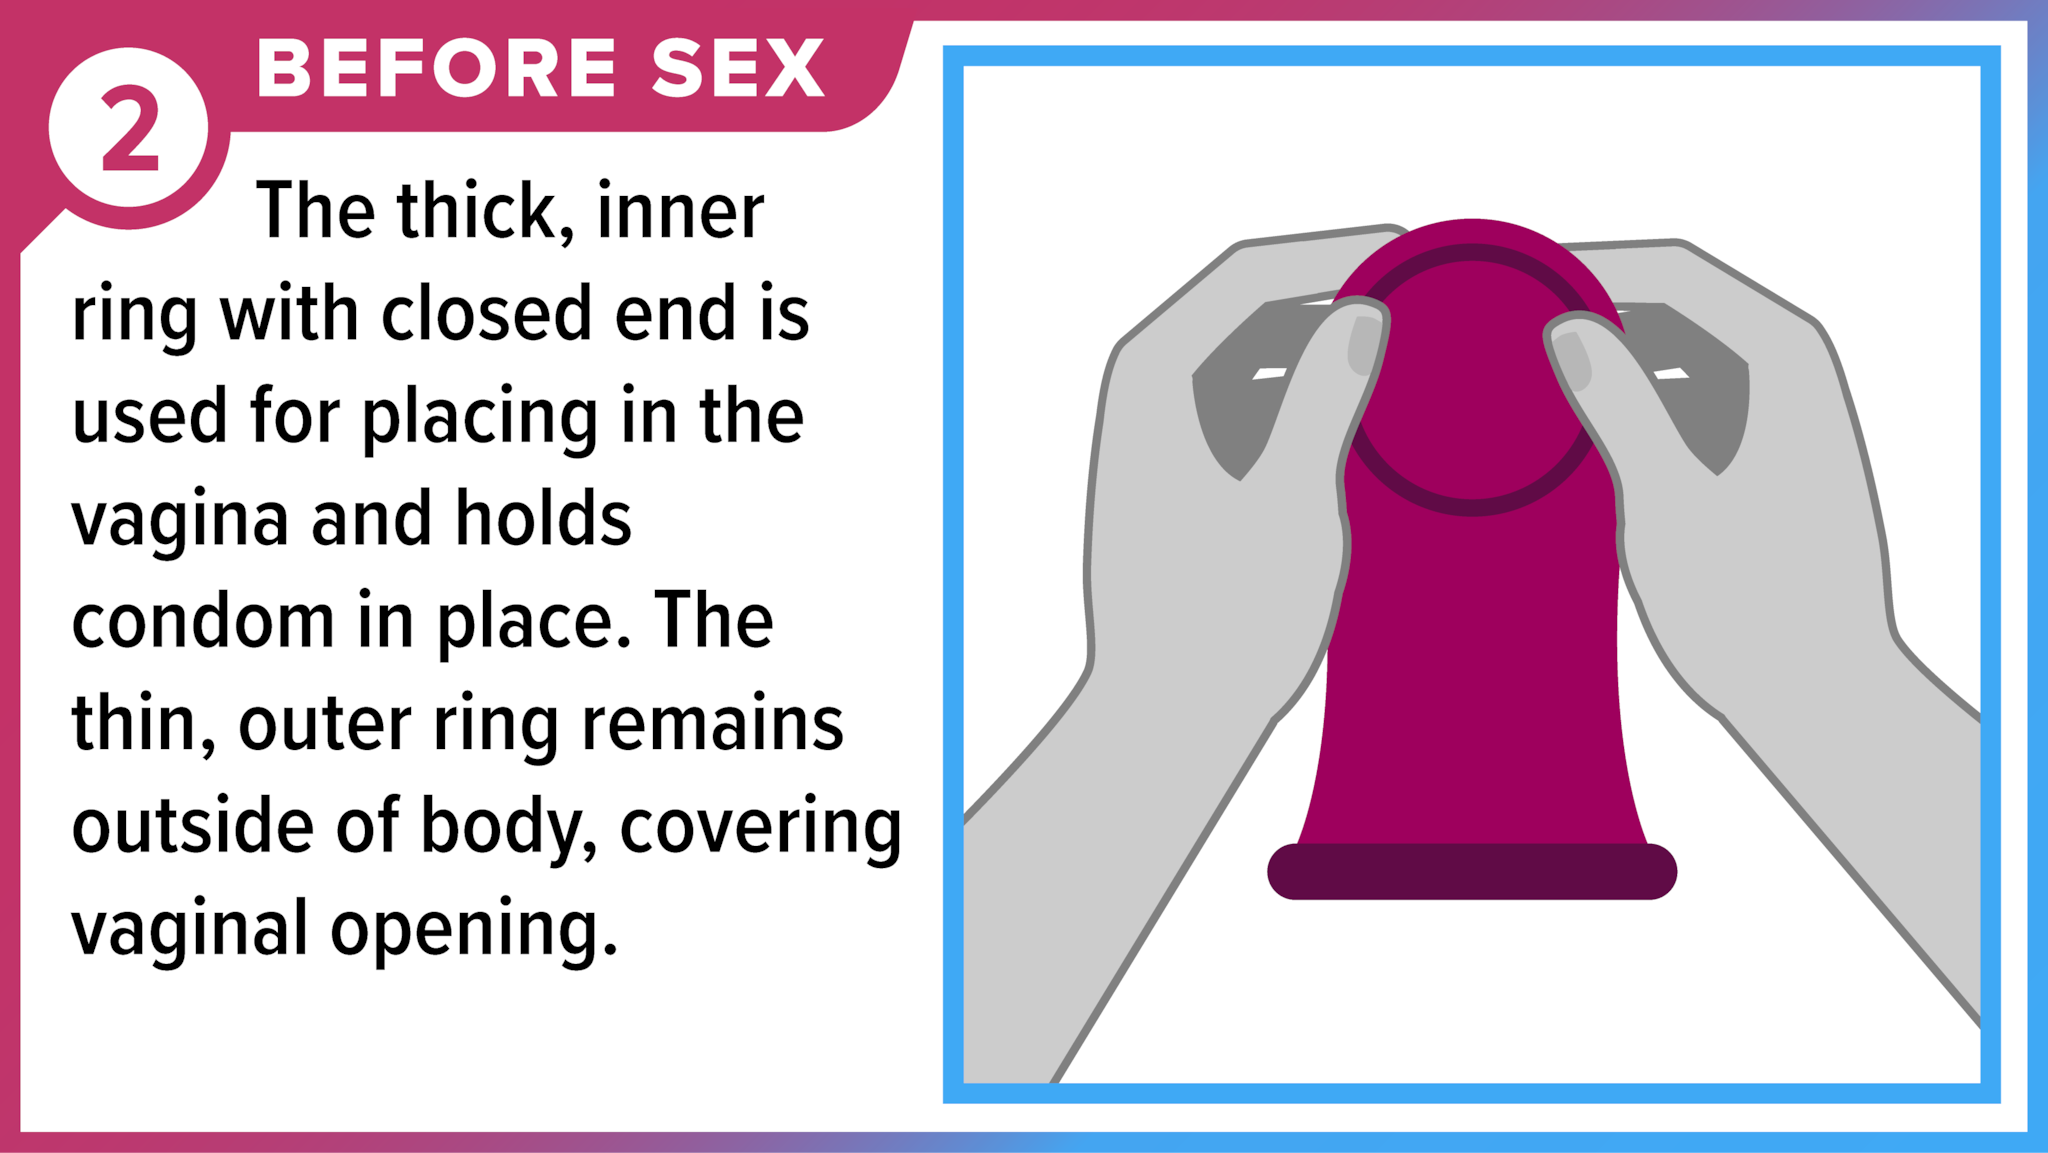 Hands holding female condom at the thick, inner ring. Before sex - The thick, inner ring with closed end is used for placing in the vagina and holds condom in place. The thin, outer ring remains outside of body, covering vaginal opening.